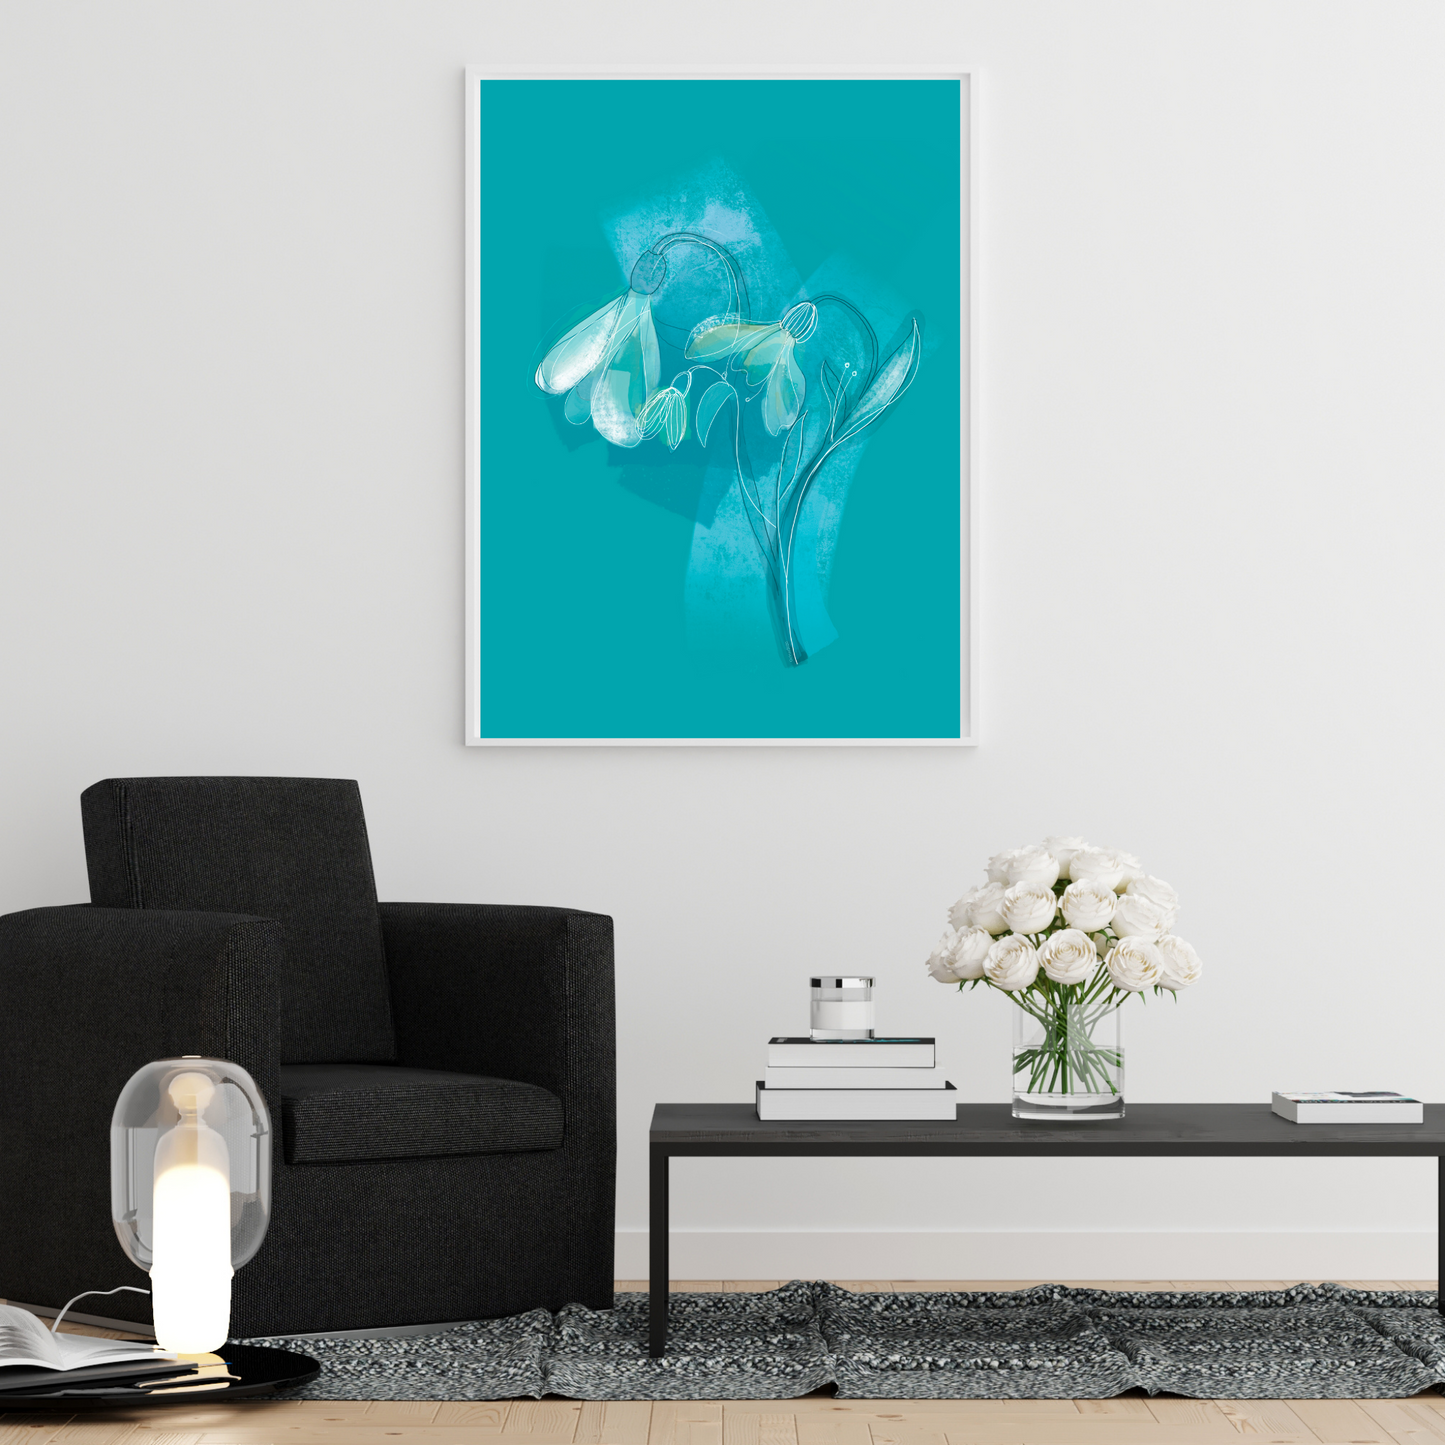 An example of the Snowdrop painting by ArisaTeam in a living room